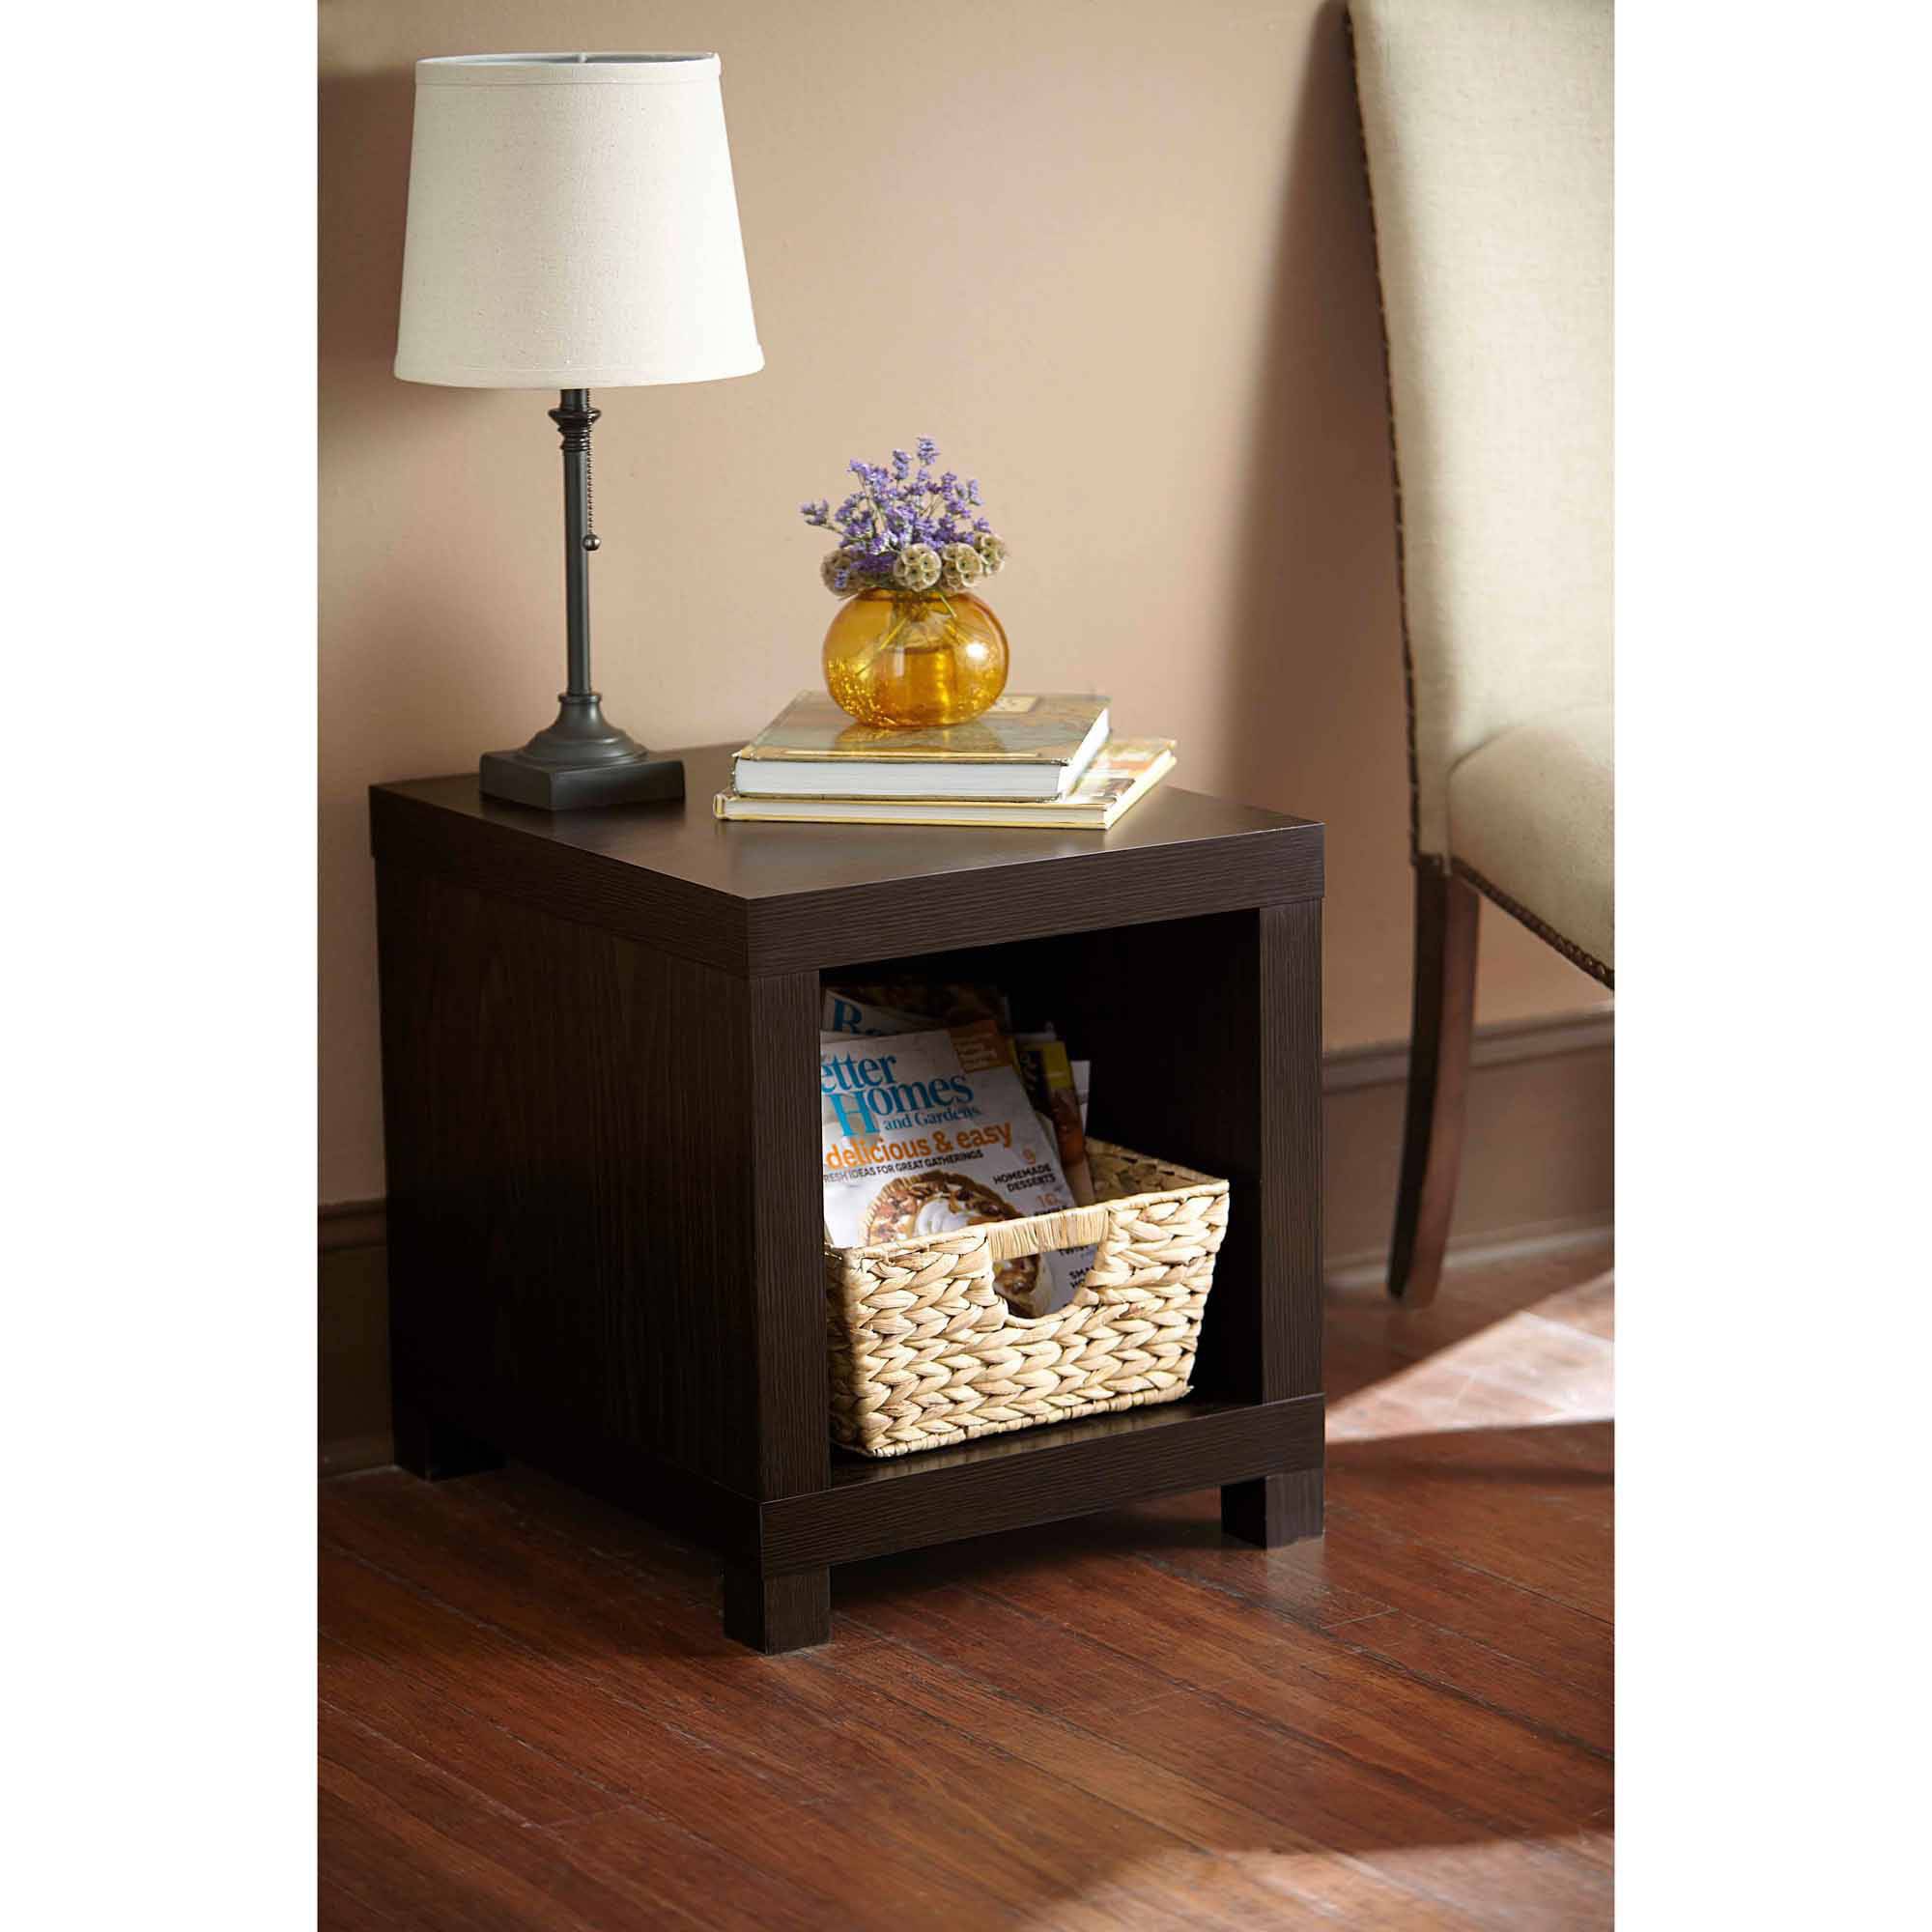 better homes gardens accent table multiple colors colorful tables hardwood threshold bar height unfinished wood end wide console orange bedroom accessories tilt umbrella with